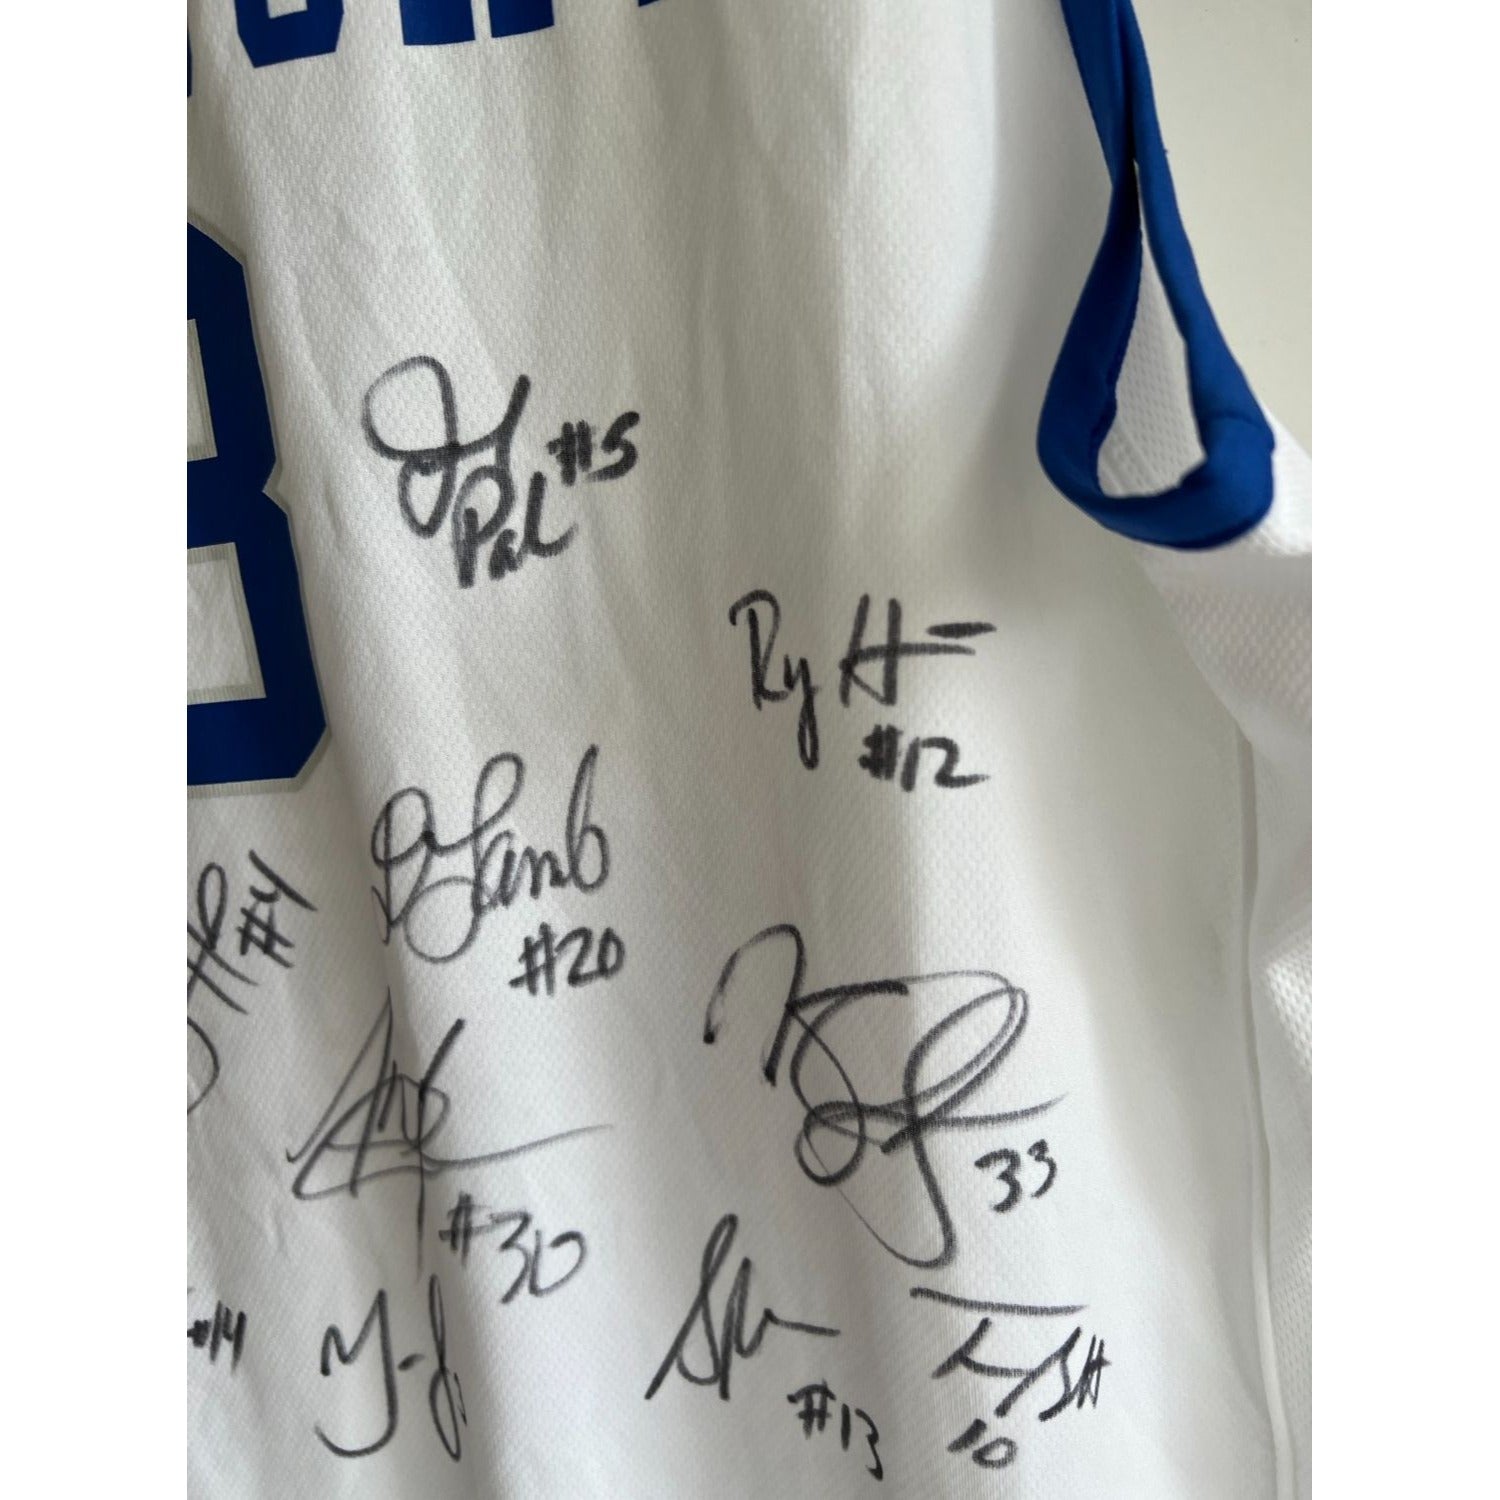 Awesome Artifacts John Calipari, Anthony Davis 2011-12 Kentucky Wildcats NCAA Champions Signed Jersey with Proof by Awesome Artifact